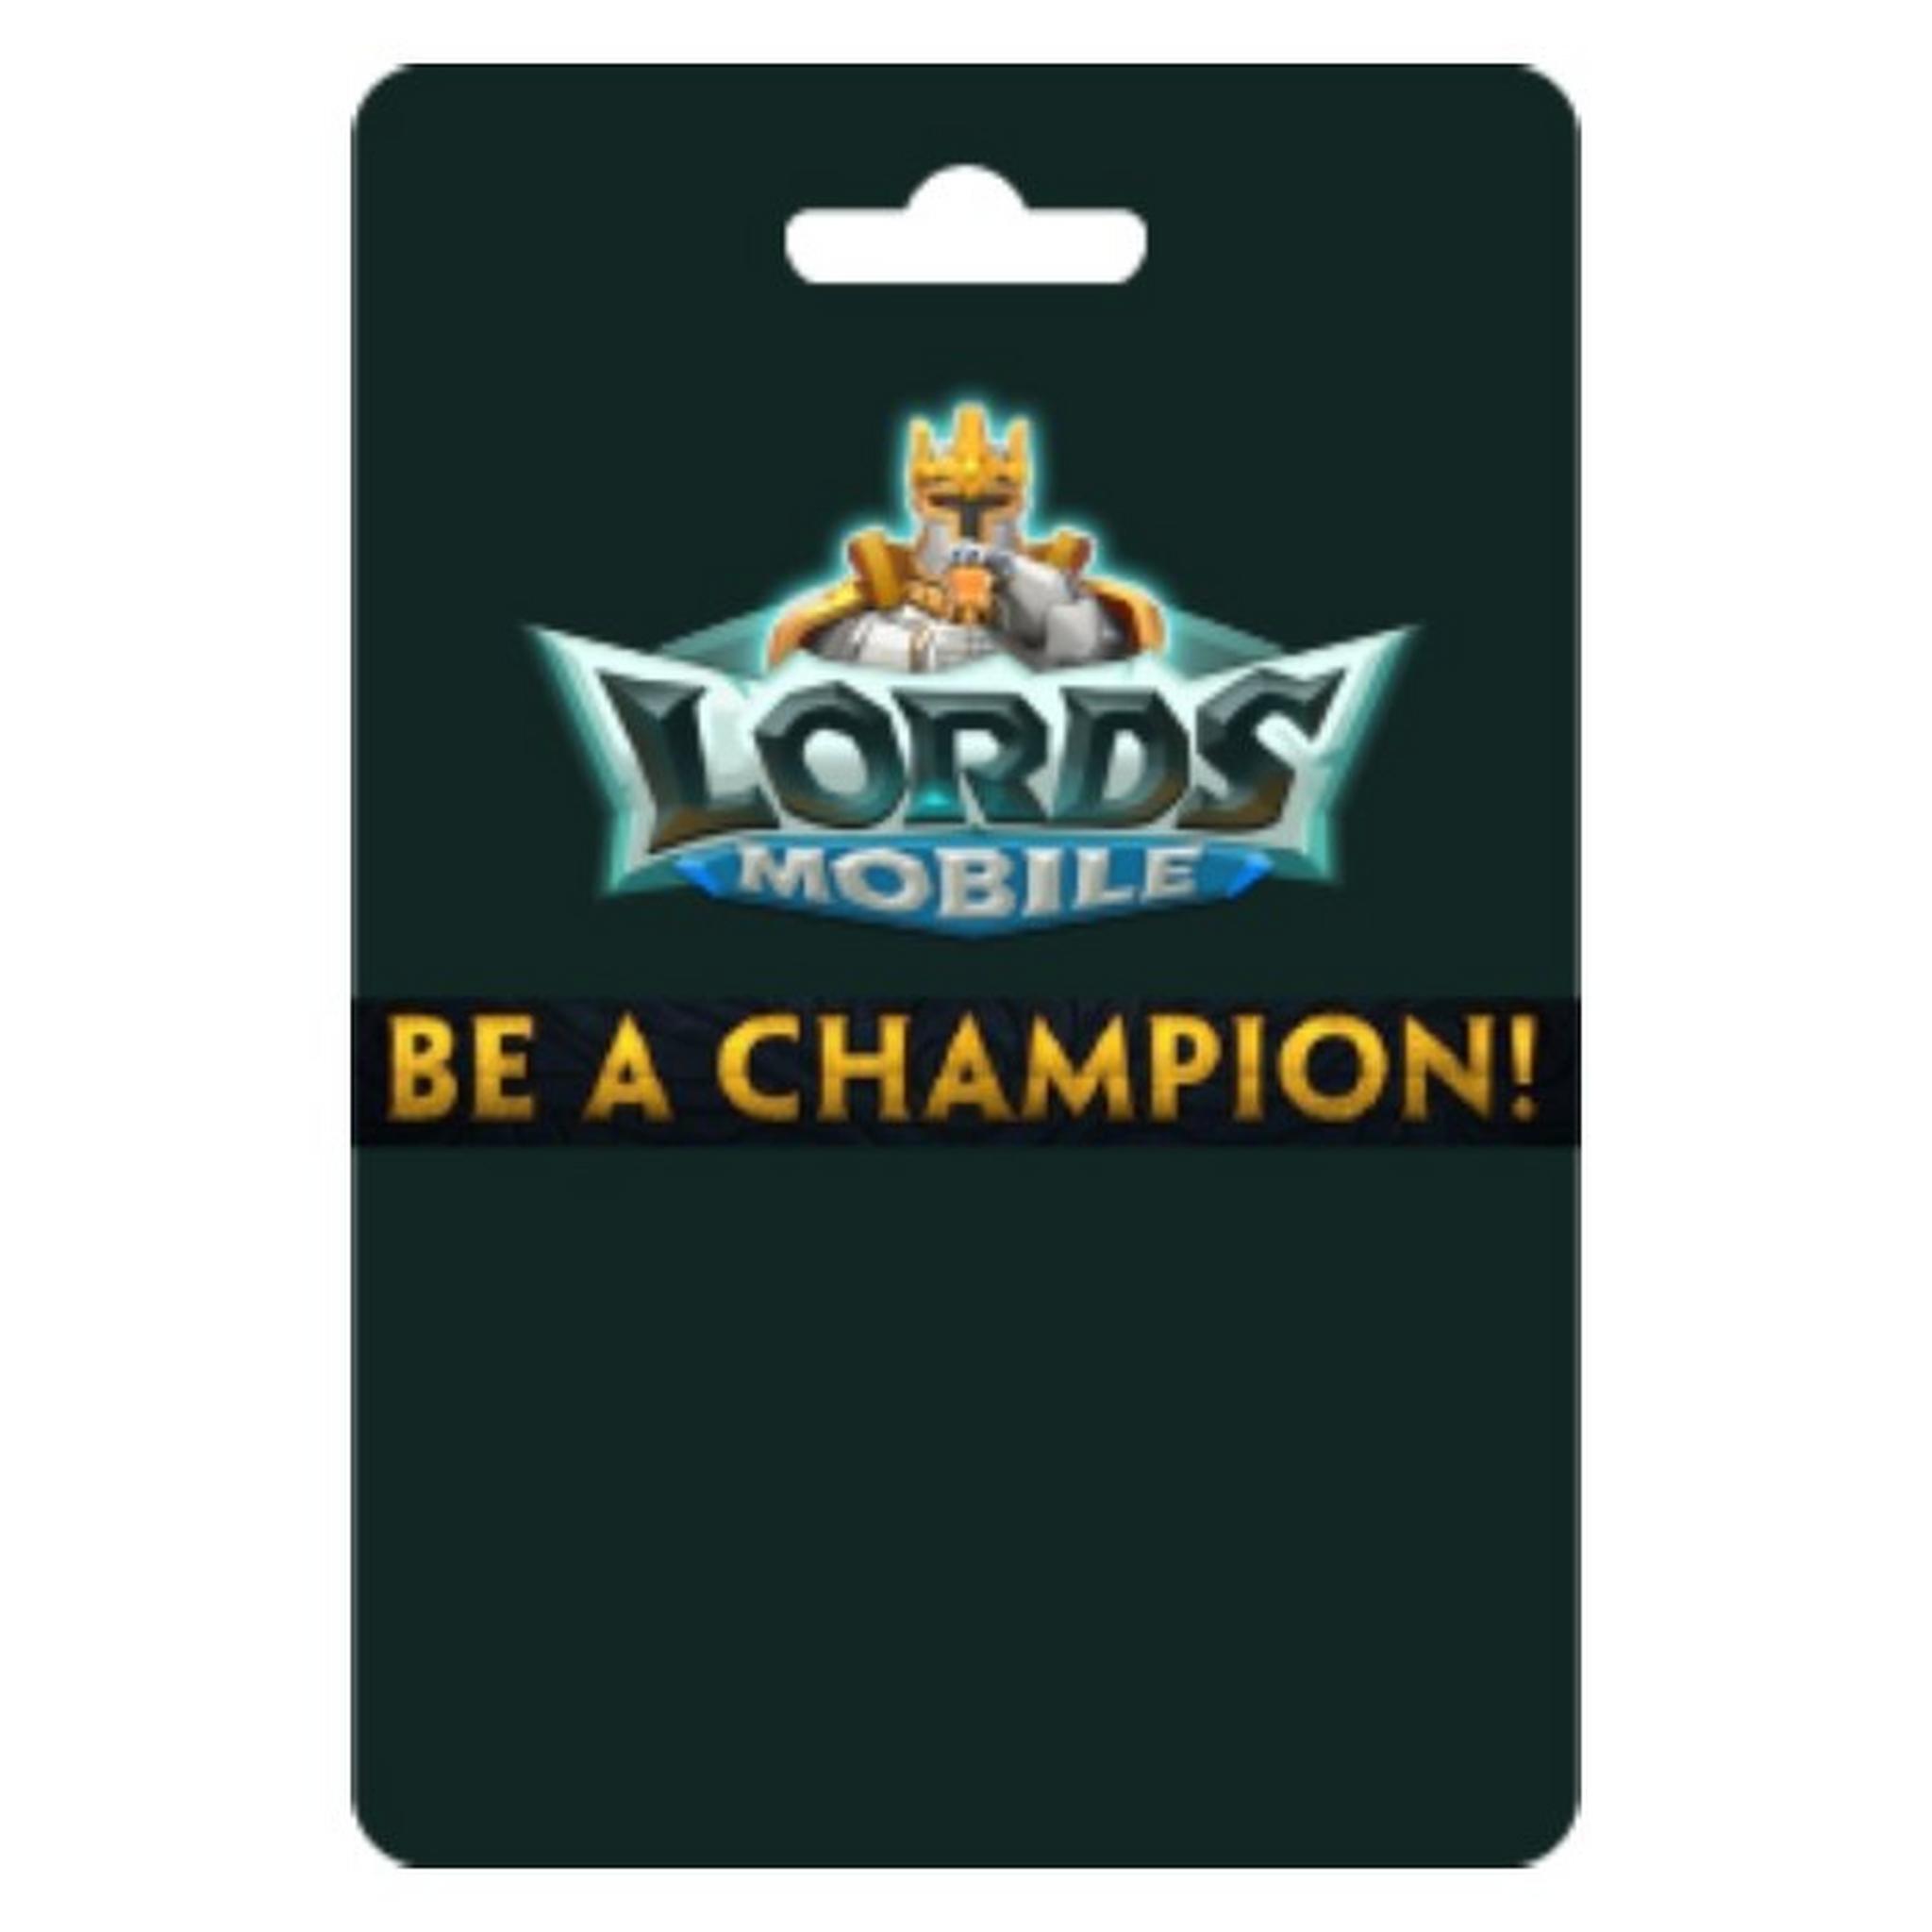 Lords Mobile Card (Be A Champion!)